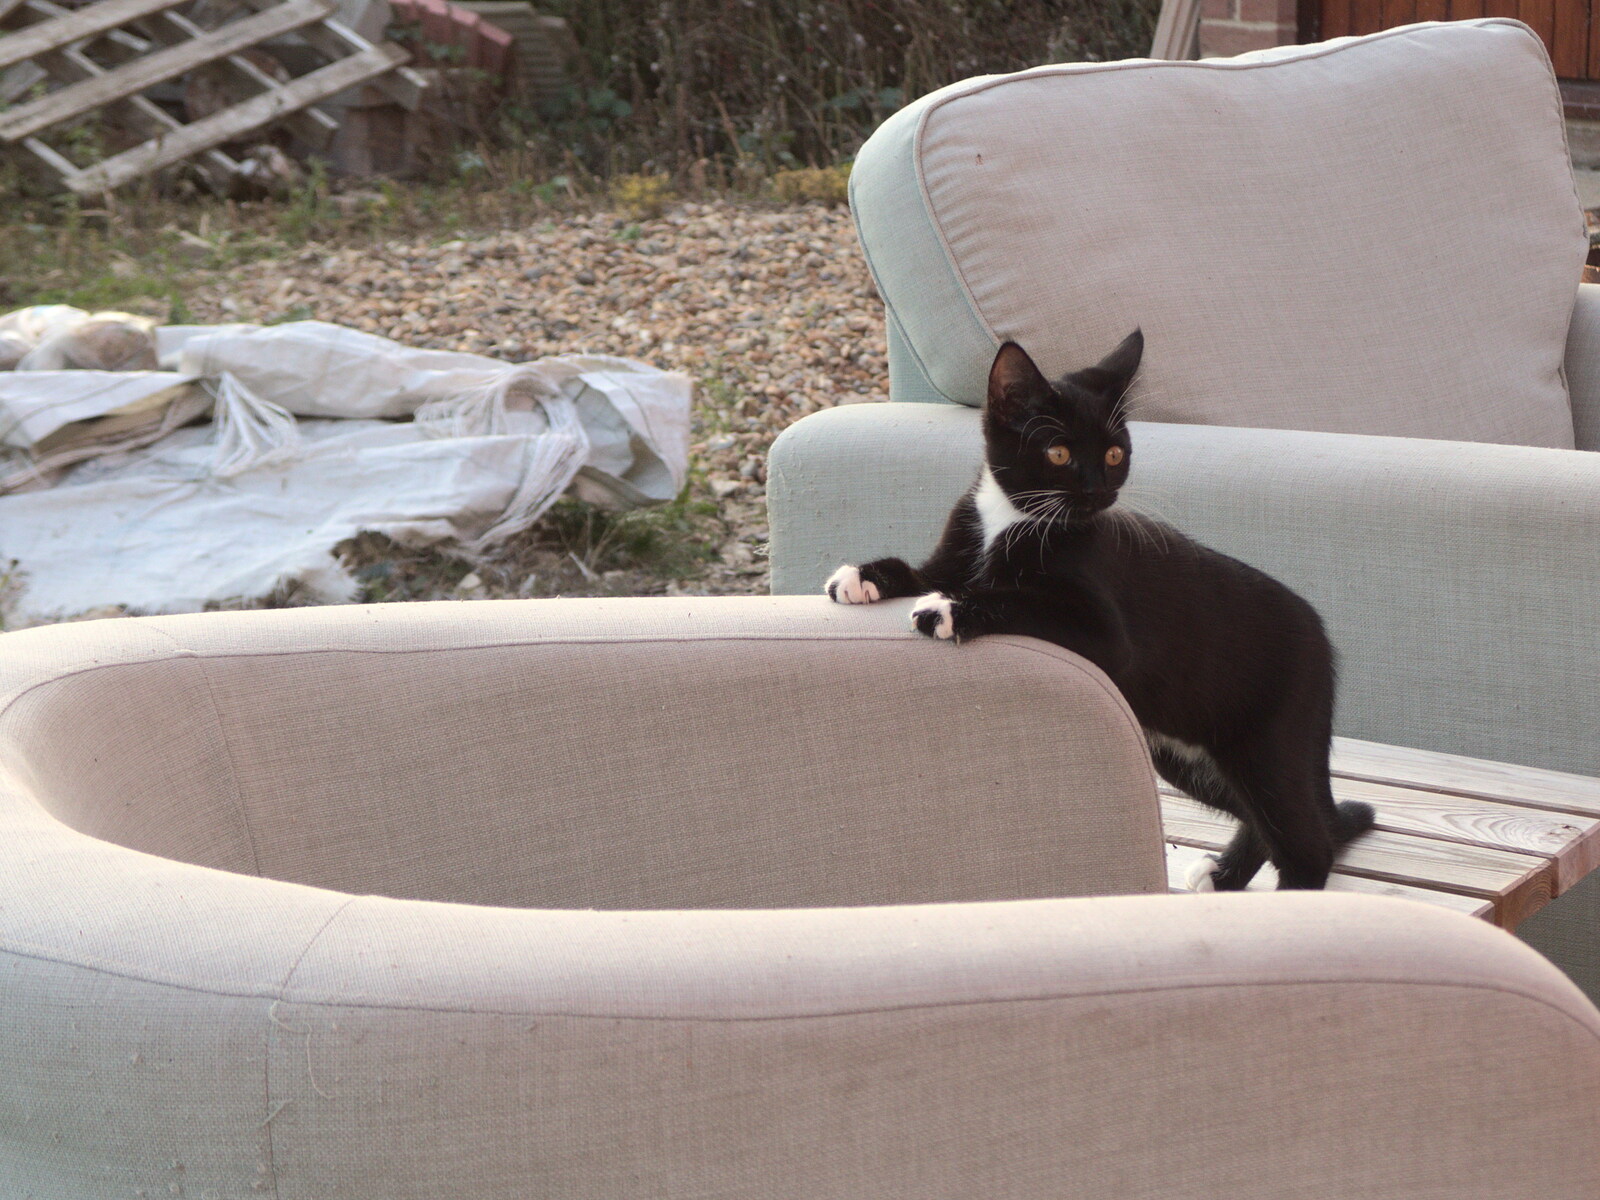 A kitten on the old armchair in the garden from A Few Hours at the Fair, Fair Green, Diss, Norfolk - 5th September 2021